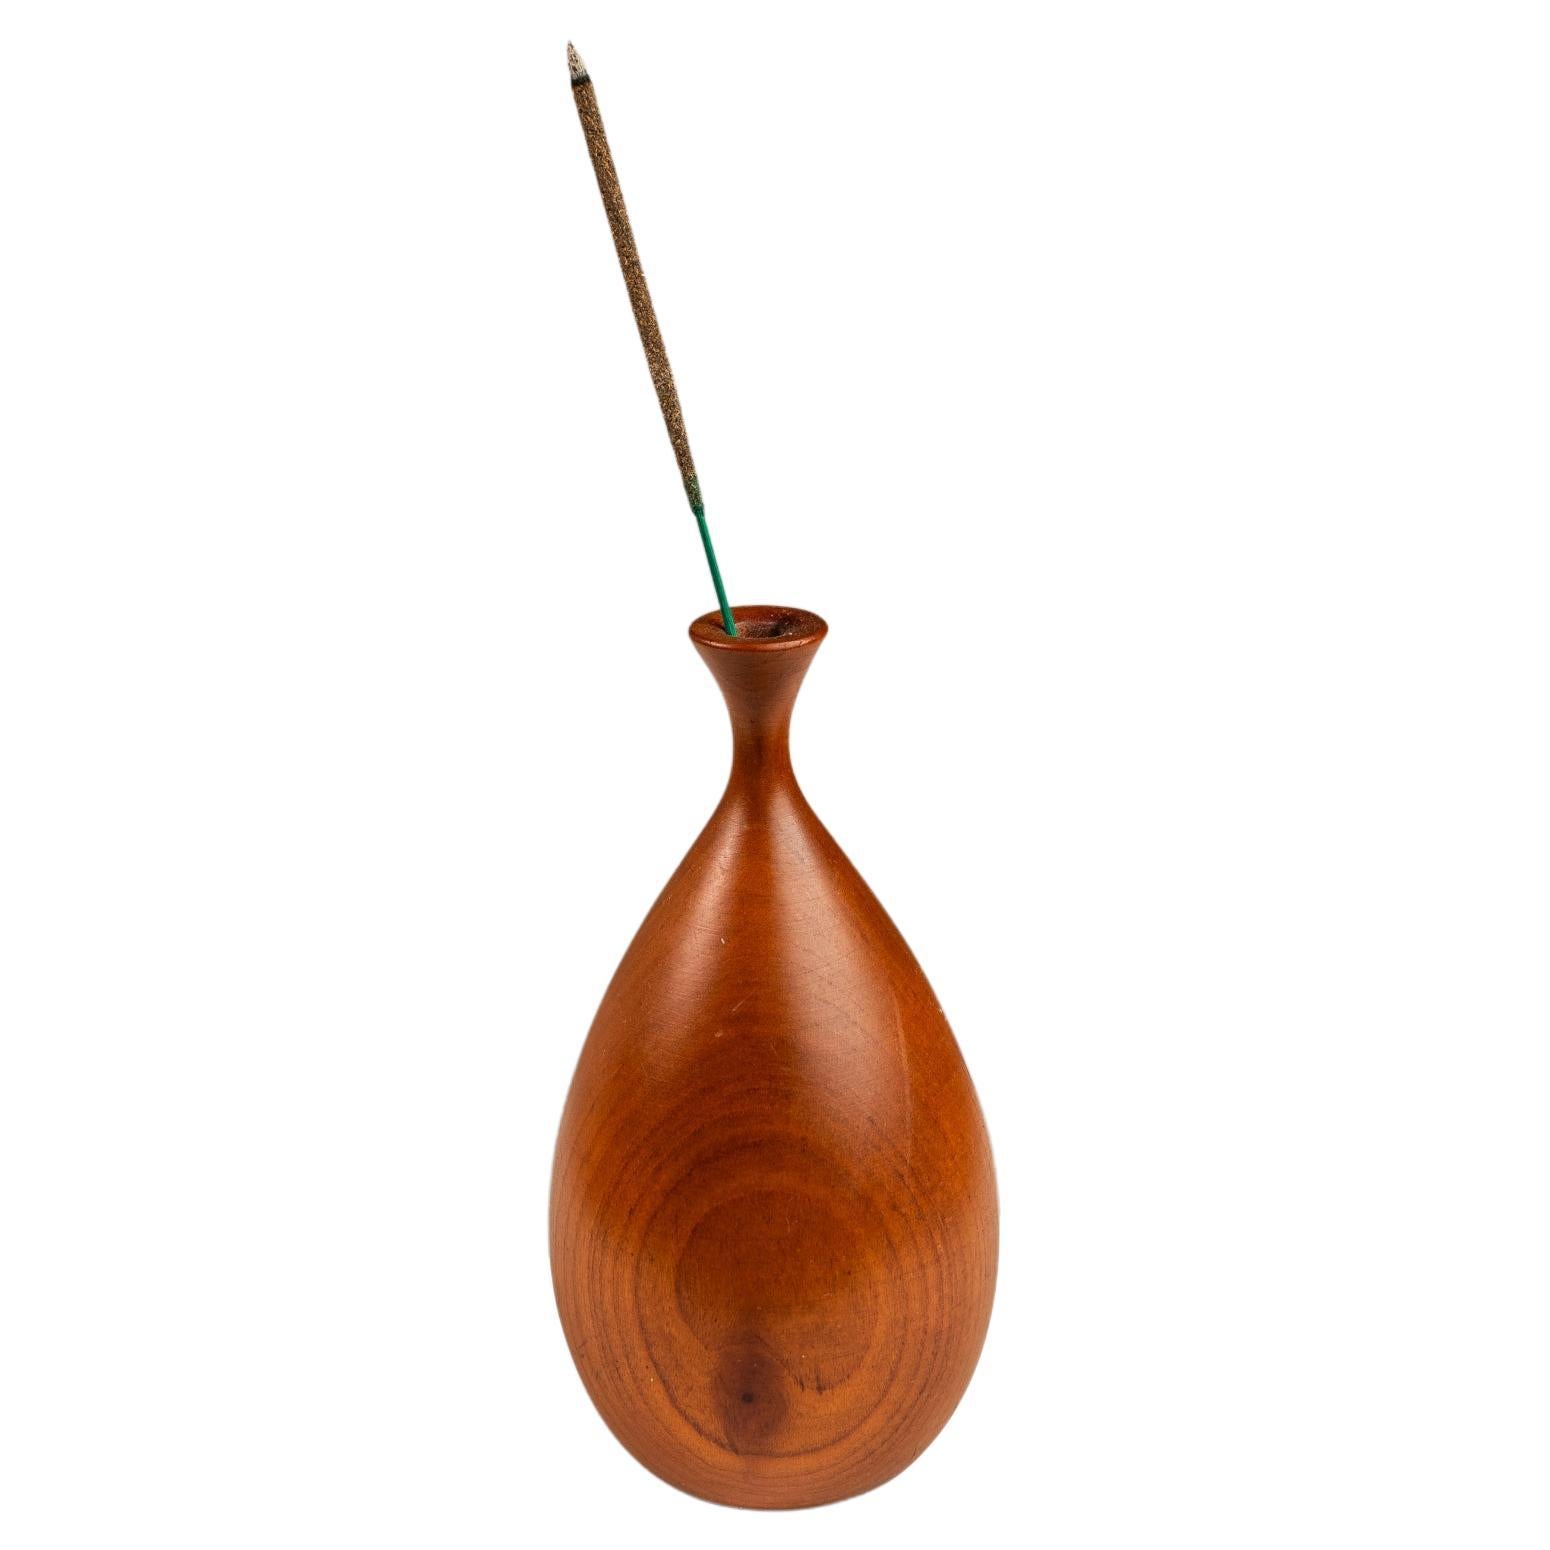 Signed Petite Wood-Turned Vase in solid Walnut by George Biersdorf, USA, c. 1979 For Sale